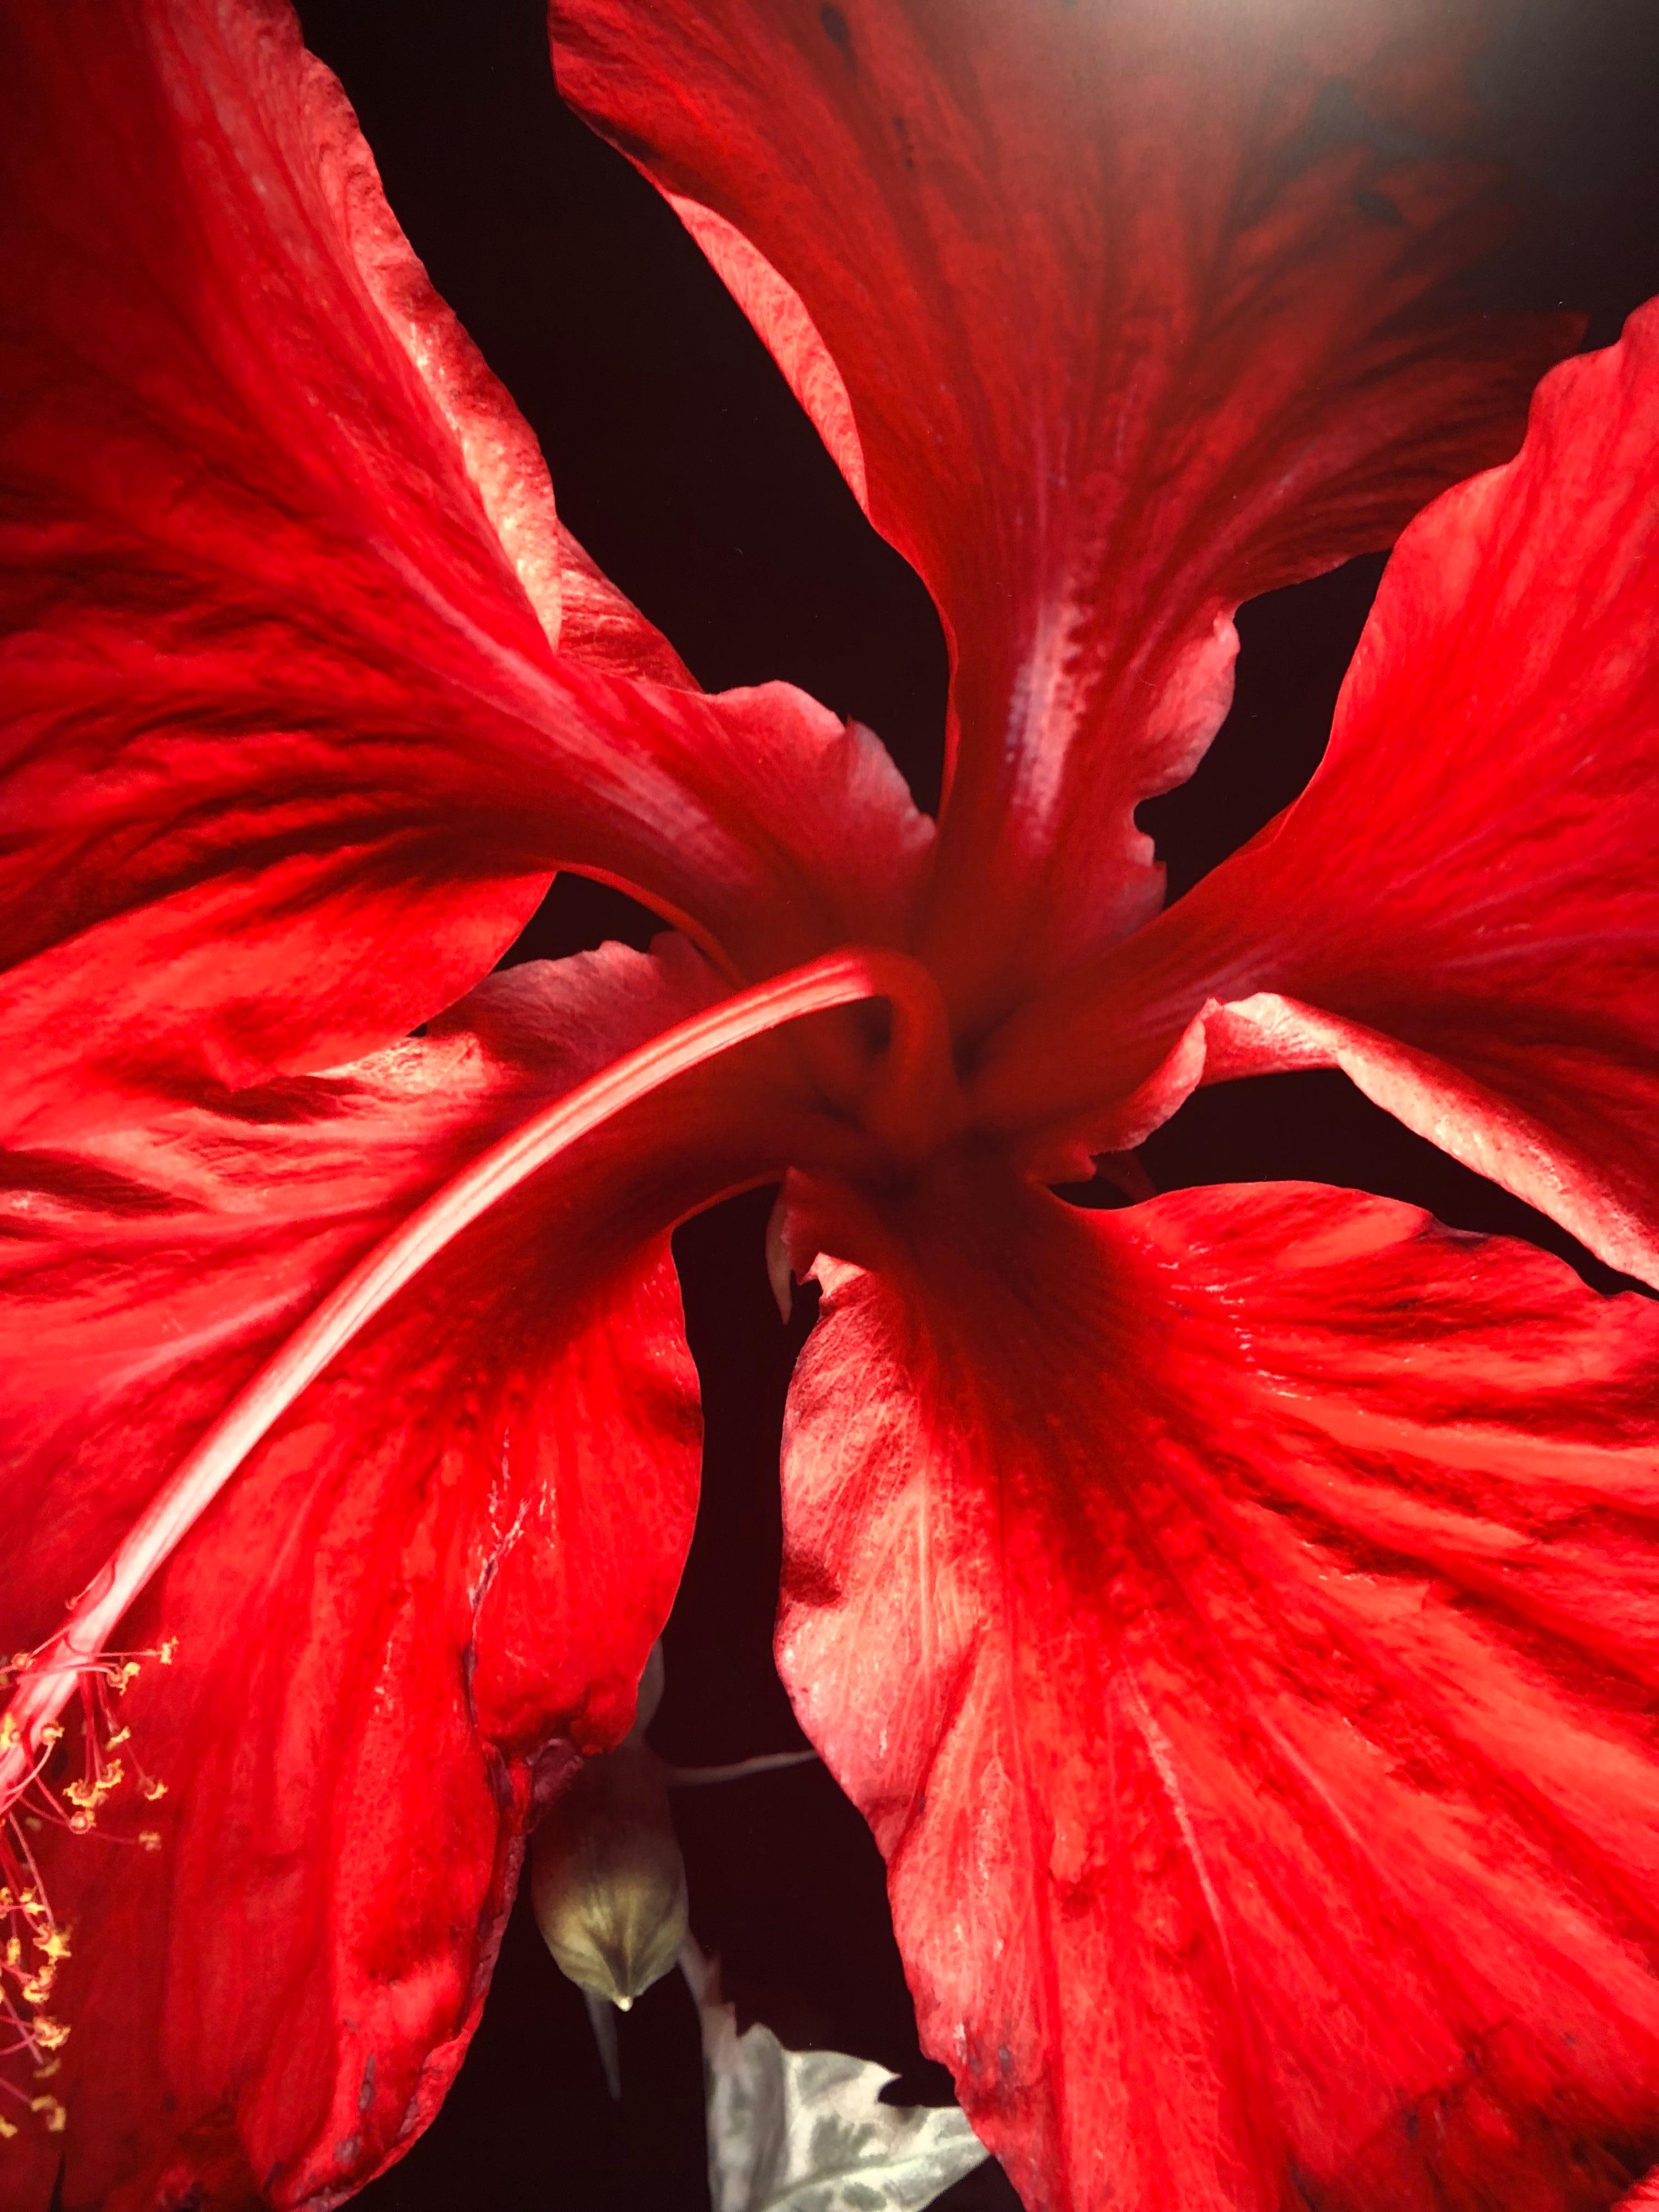 Hibiscus - Polychrome Photograph on Aluminum - Black Still-Life Photograph by Laurie Tennent